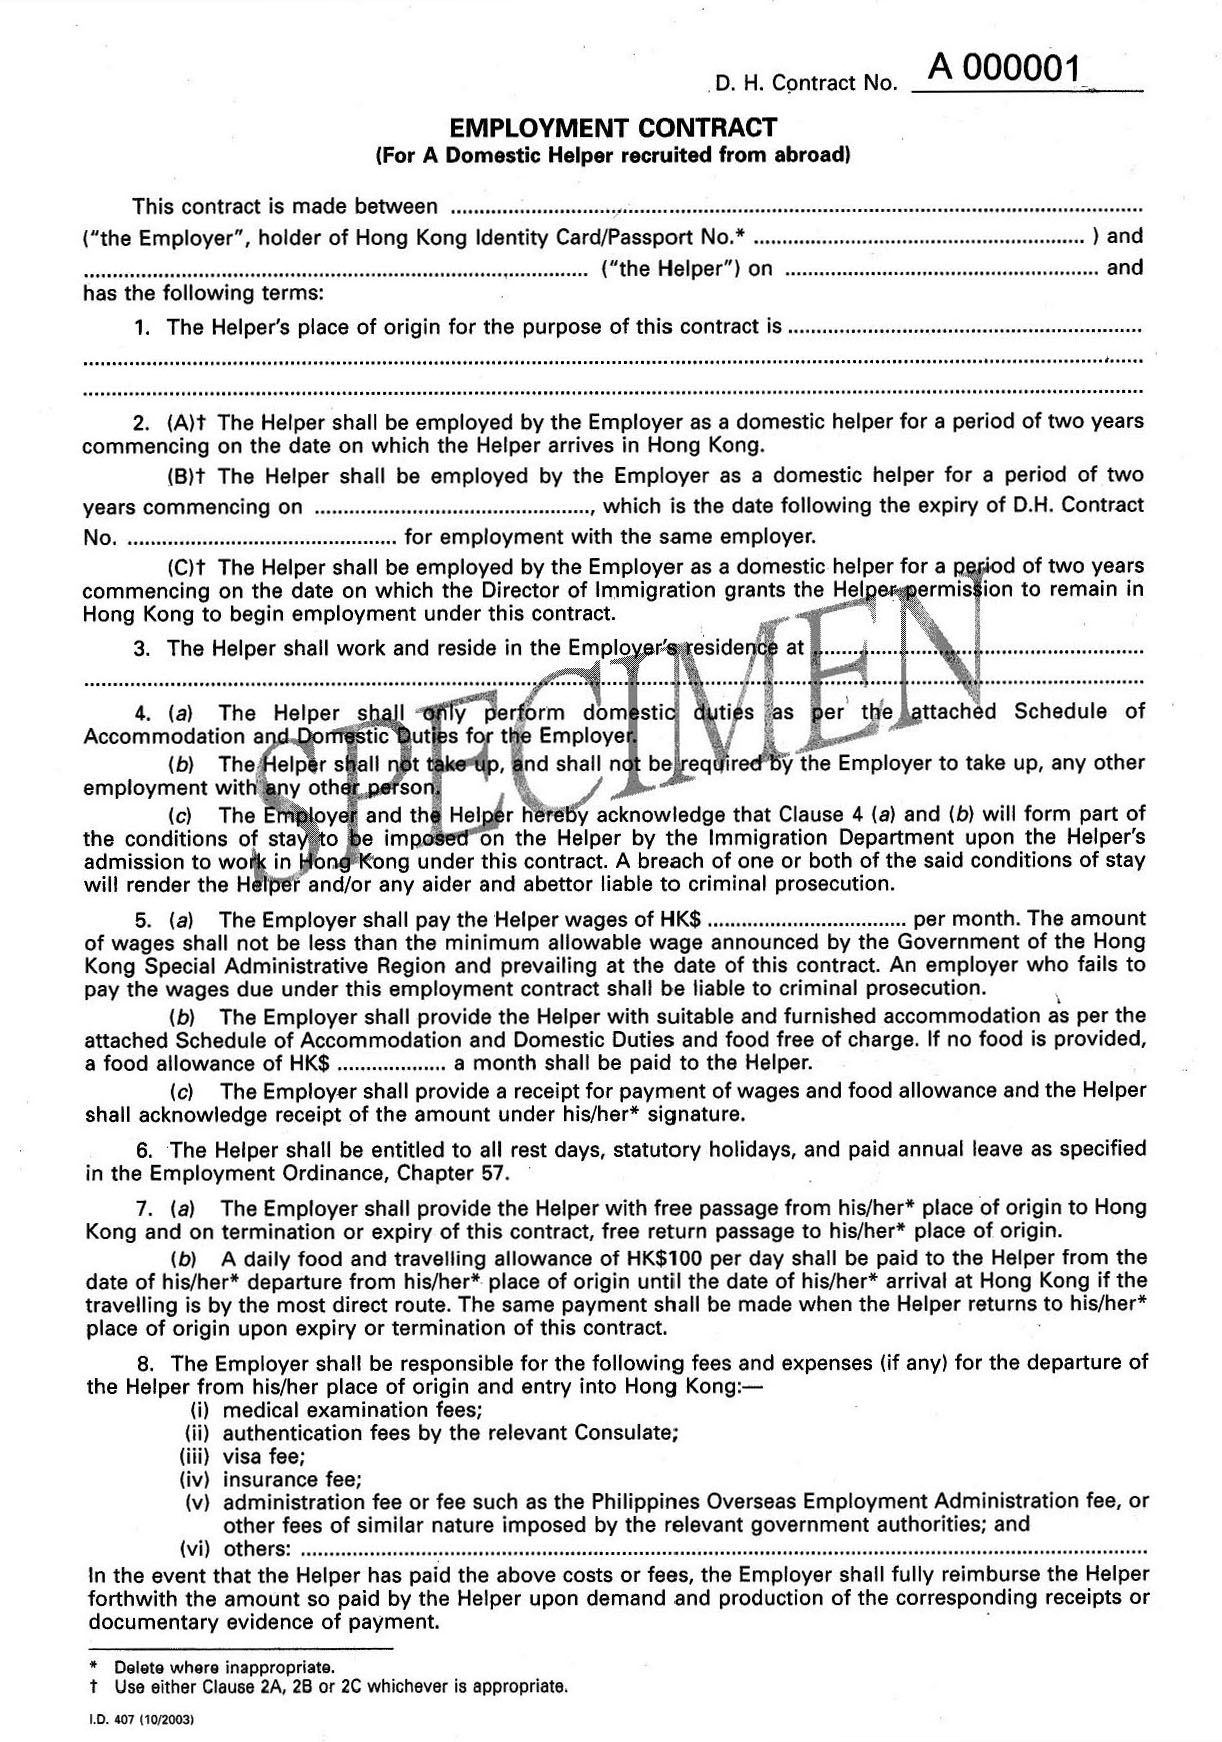 Employment contract sample